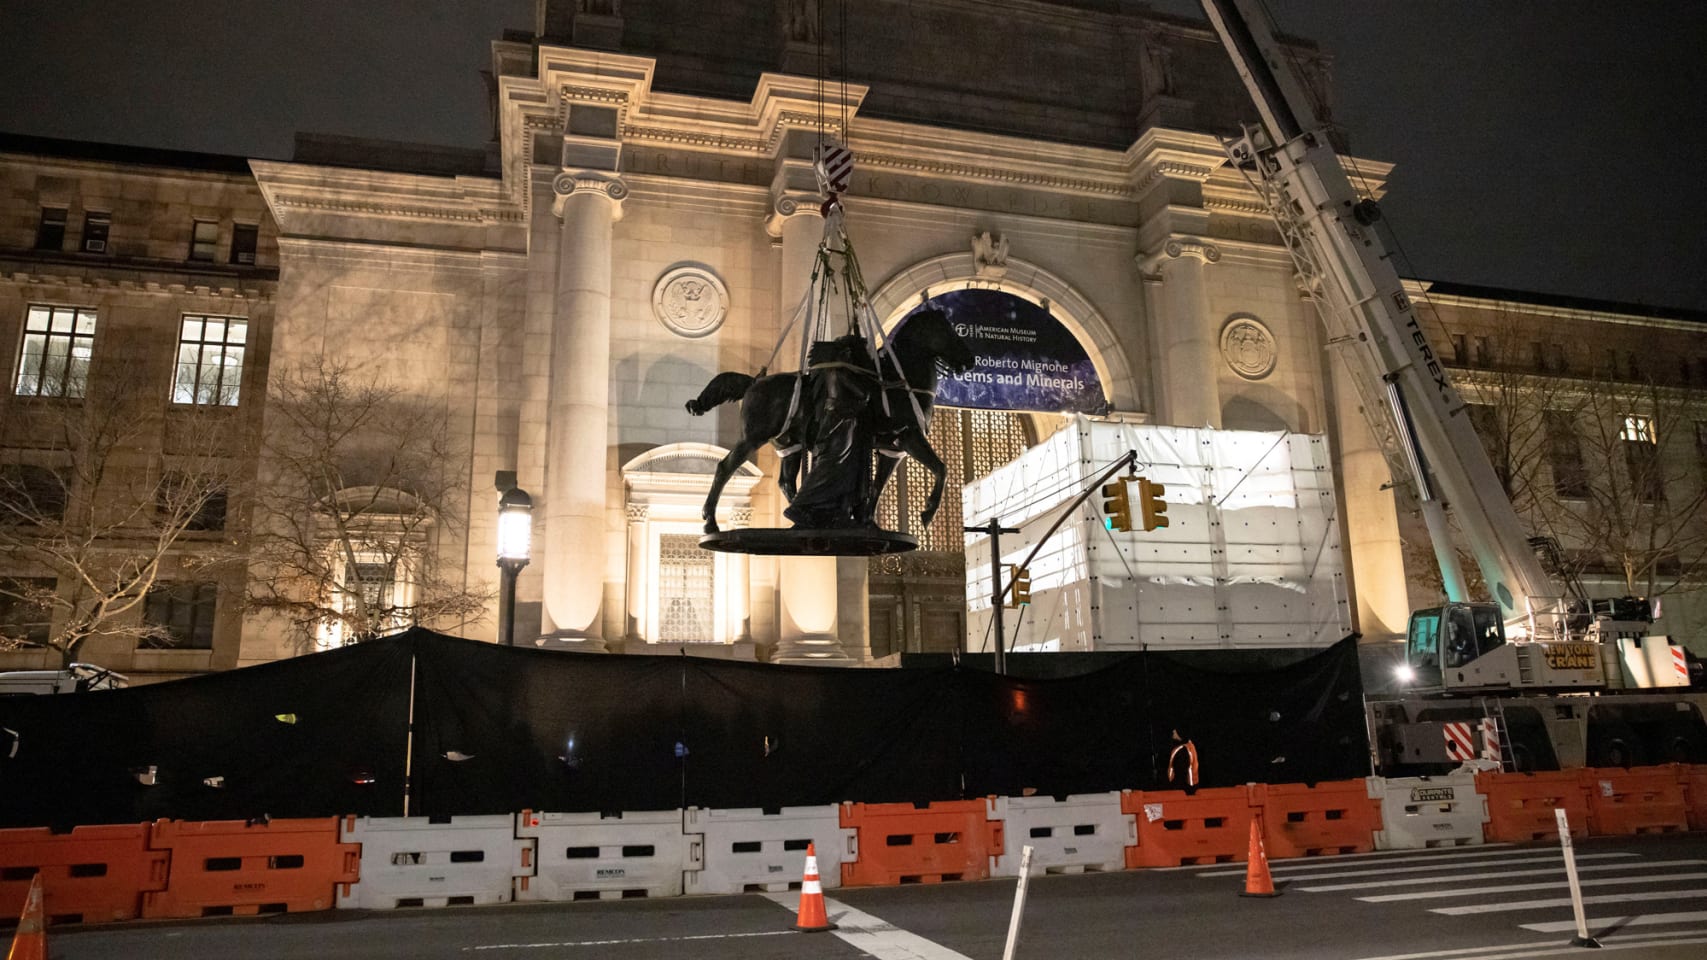 The Roosevelt statue was removed from the New York Museum following the controversy